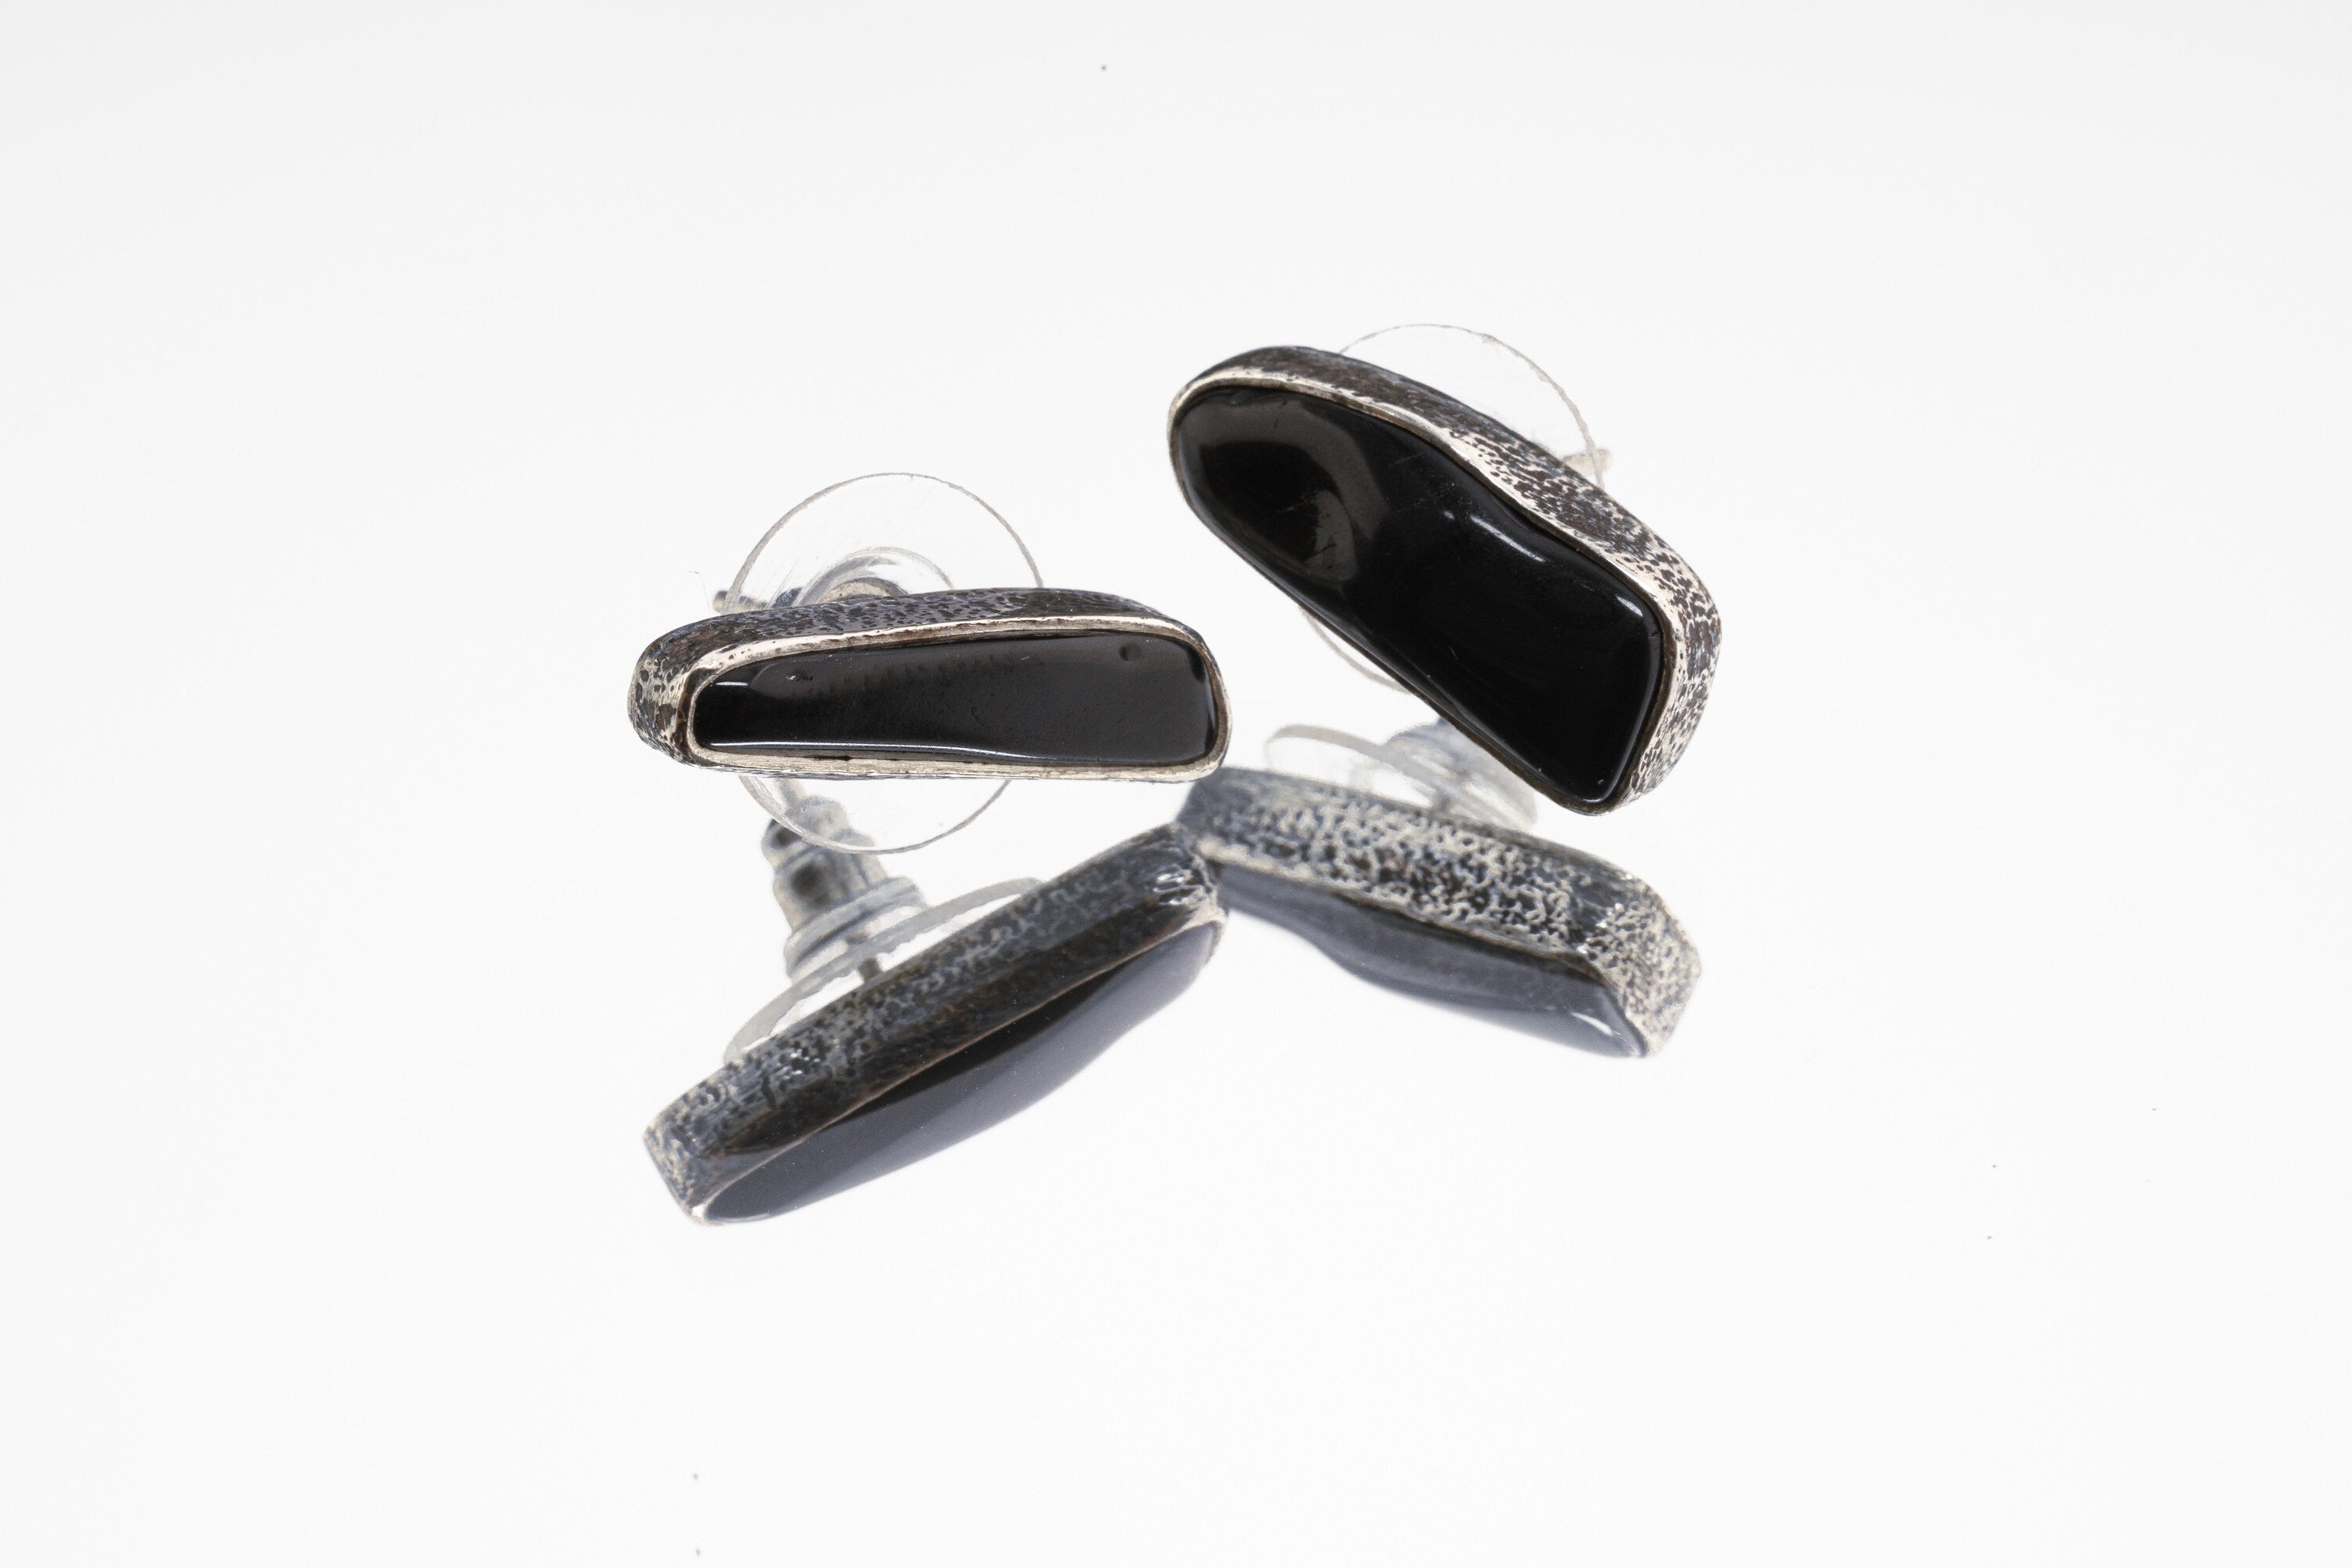 Onyx Stud - Textured Finish - organic shaped Pair - Sterling Silver - Freeform Earring Studs